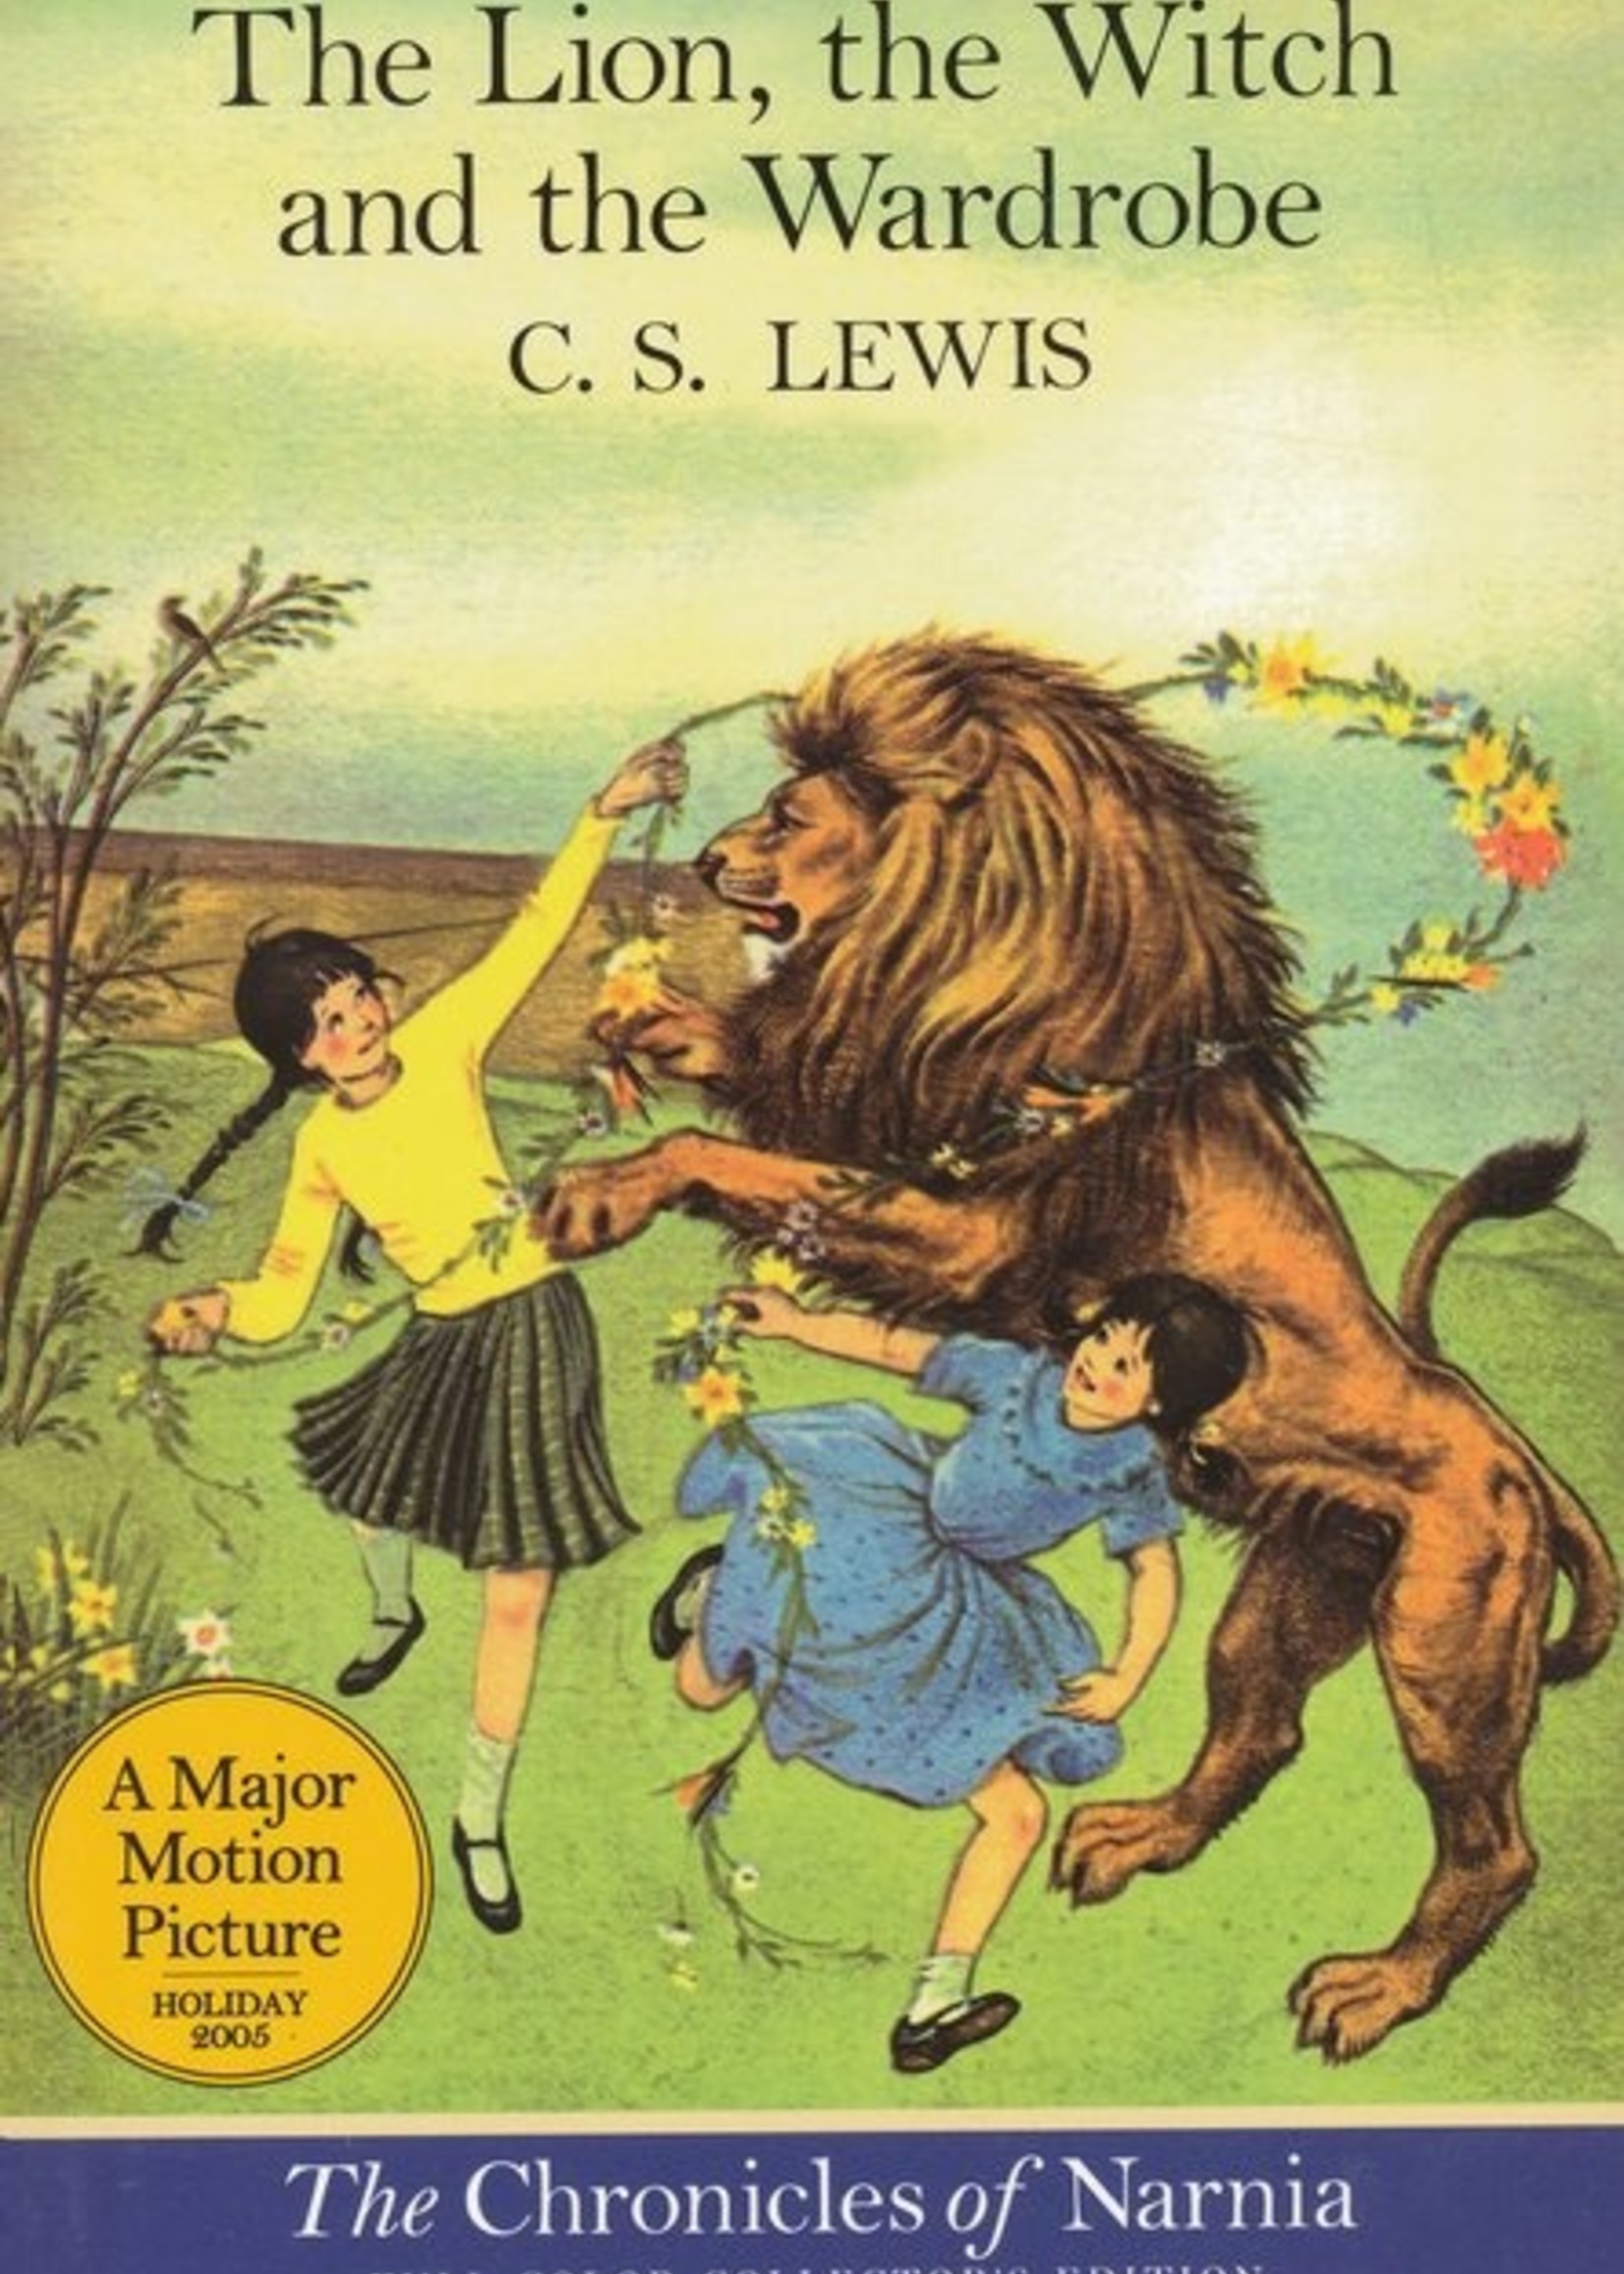 Chronicles of Narnia #02, The Lion, the Witch and the Wardrobe - Paperback